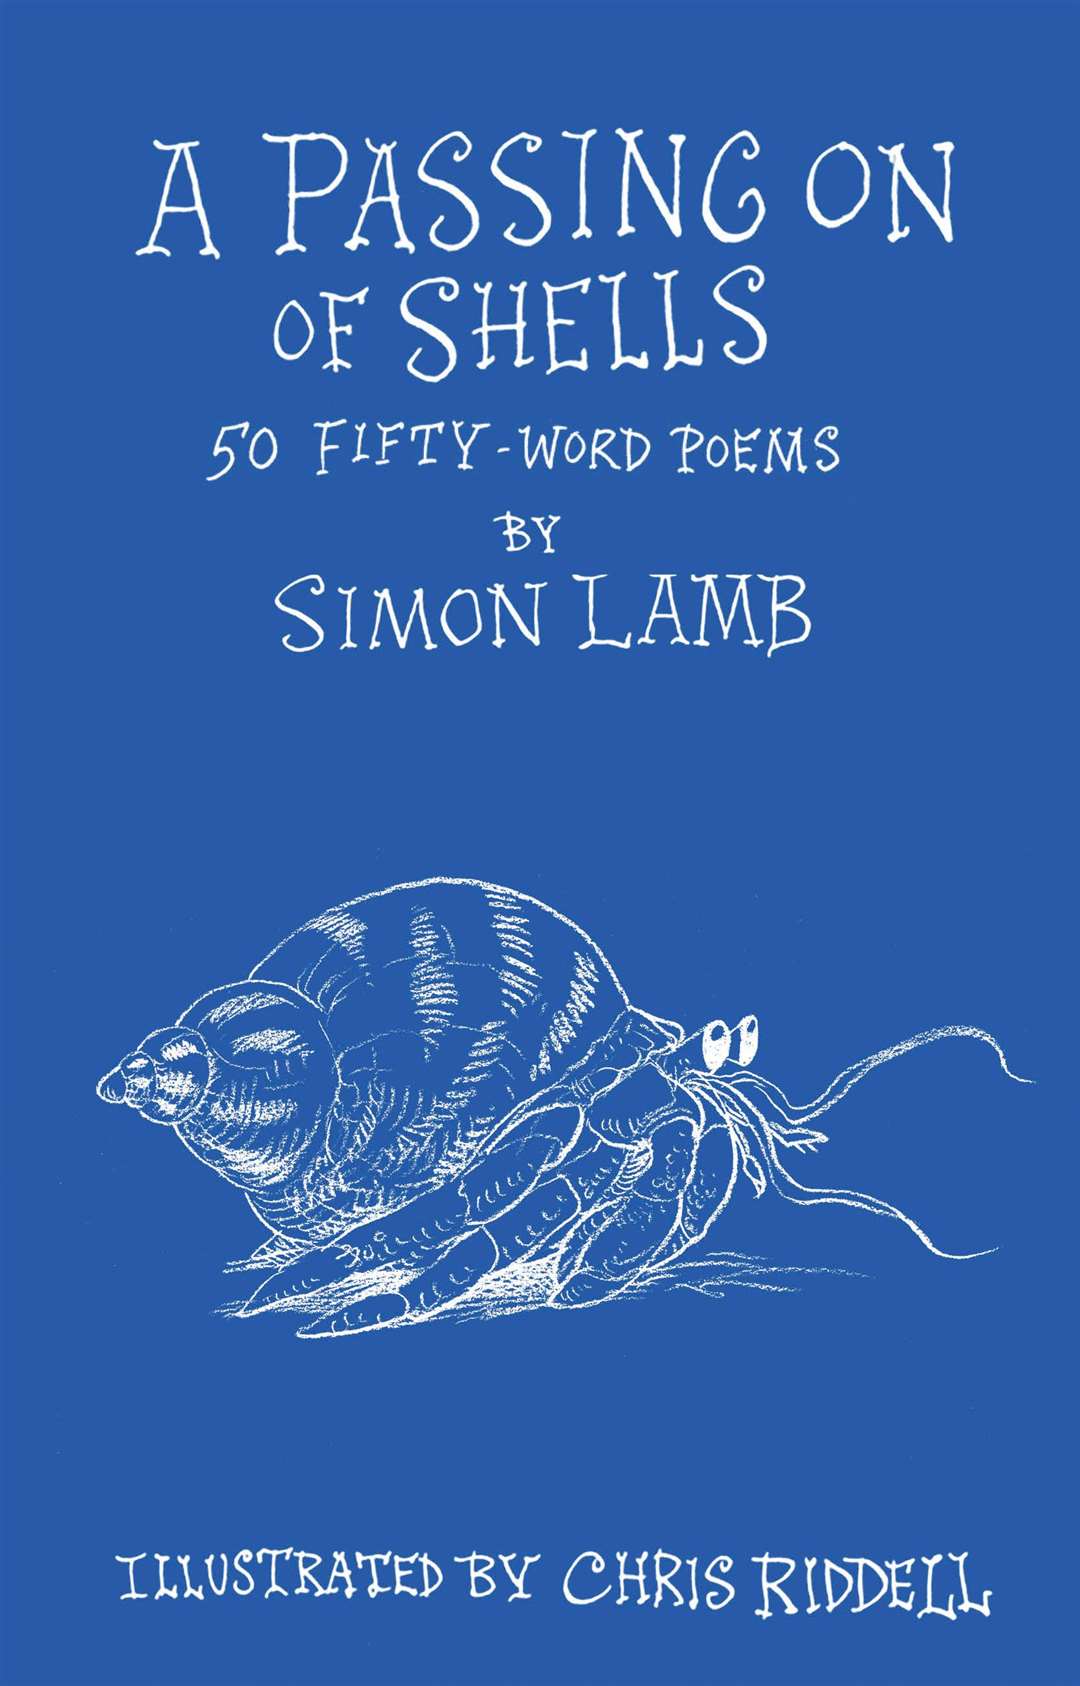 The cover for A Passing On of Shells (Scallywag Press).